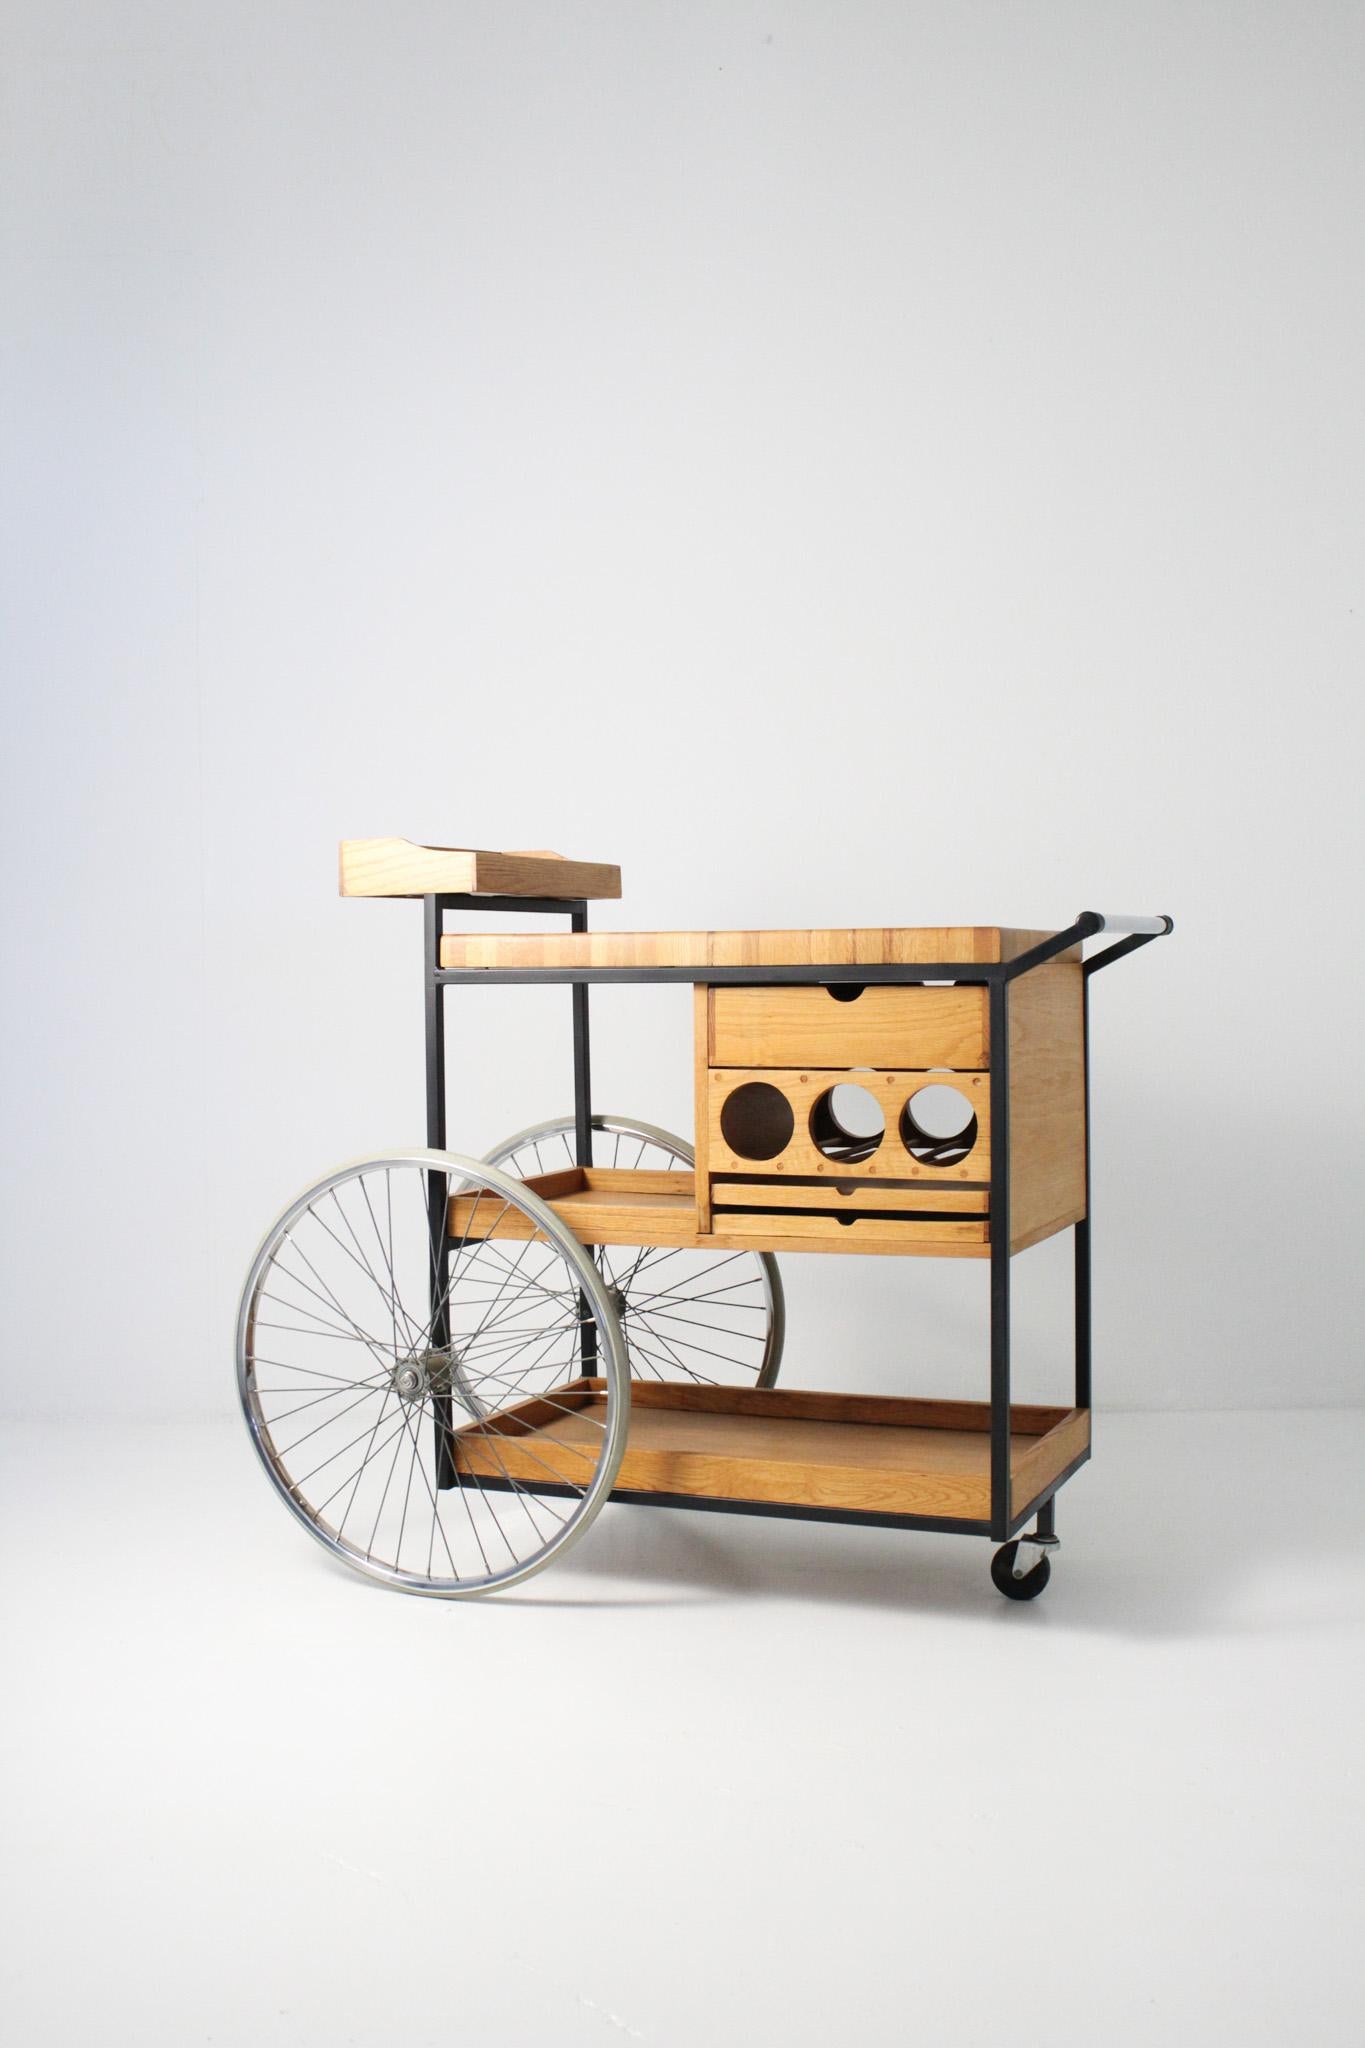 Extraordinary oak and mahogany three wheel serving cart by Arthur Umanoff. Black lacquered iron frame, large bicycle style wheels and a single pivoting wheel. Butcher block top with center polished aluminum textured disc. Three wine bottle holder